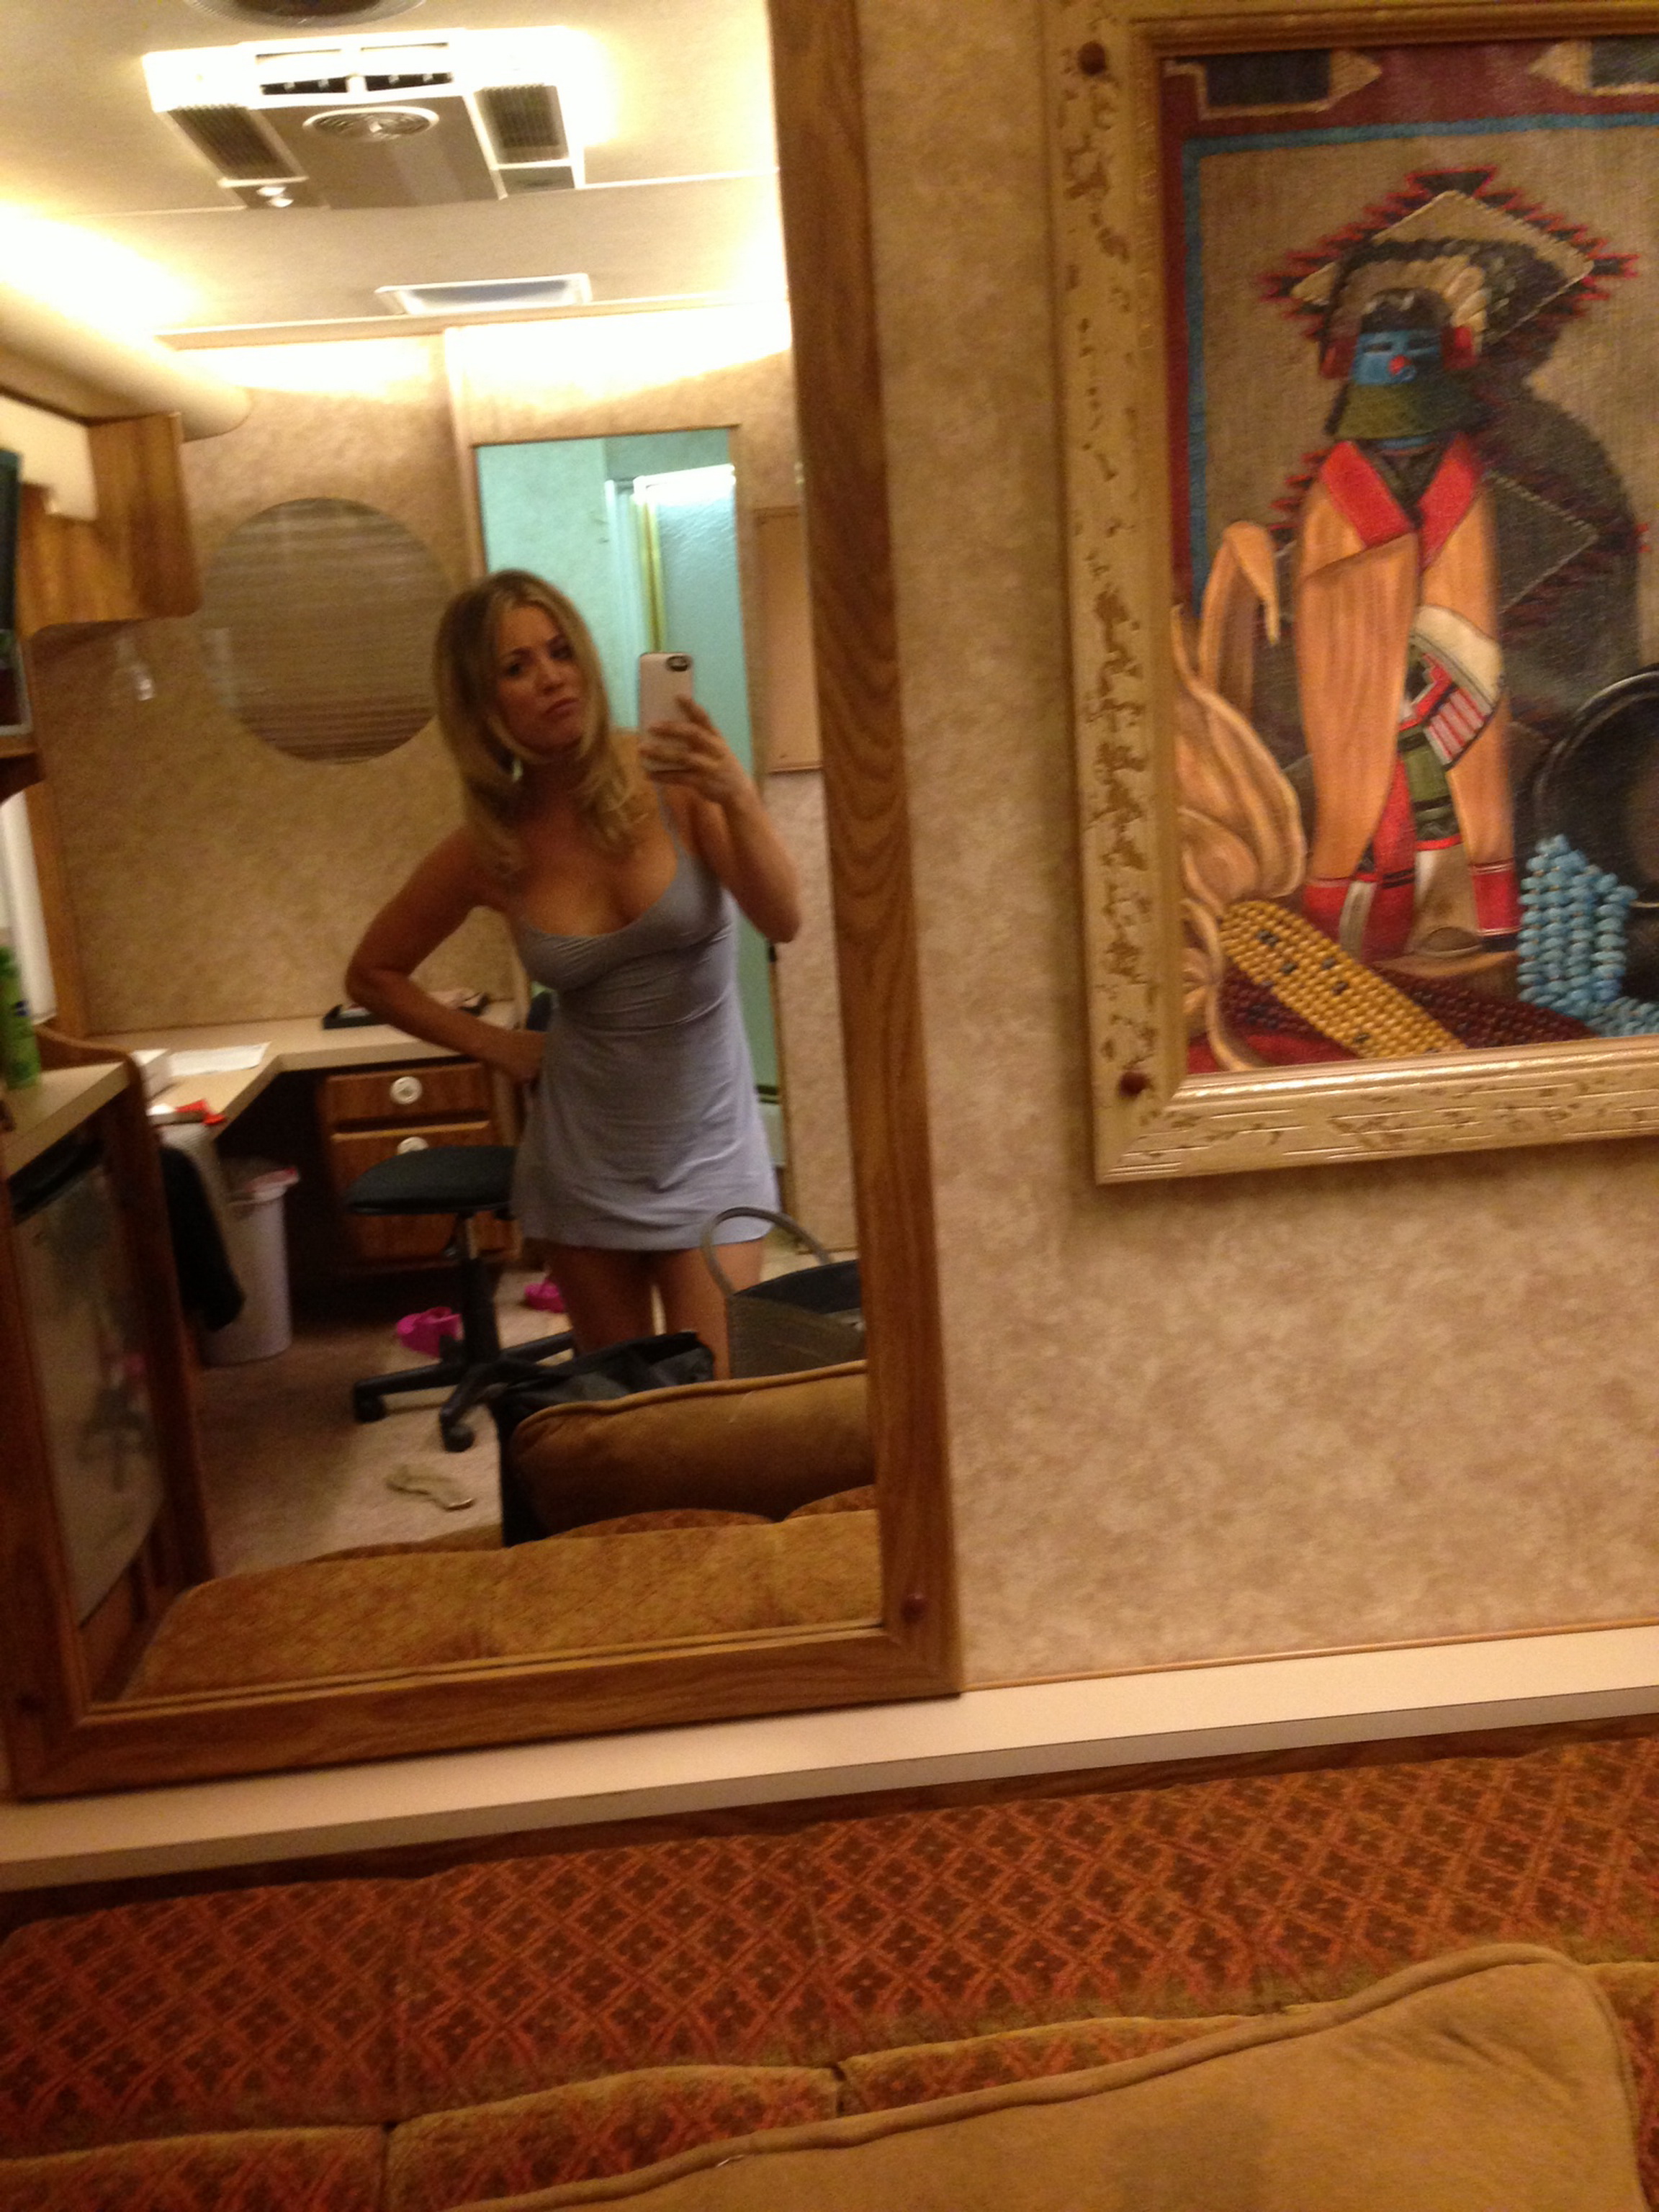 Kaley_Cuoco_leaked_private_nude_photo_and_video_hacked_personal_naked_pics_46x_MixQ_23.jpeg